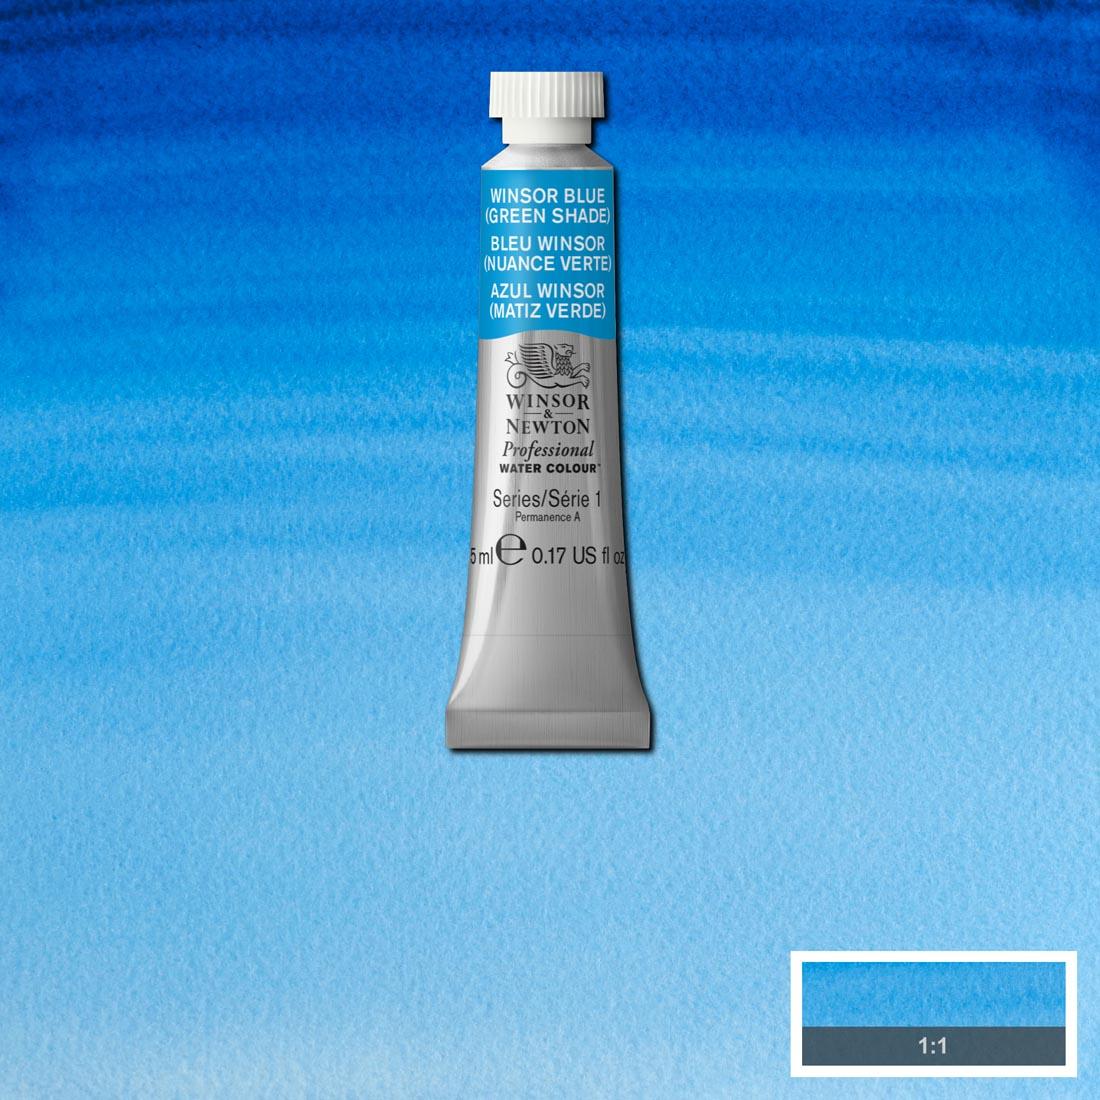 Tube of Winsor Blue (Green Shade) Winsor & Newton Professional Water Colour with a paint swatch for the background